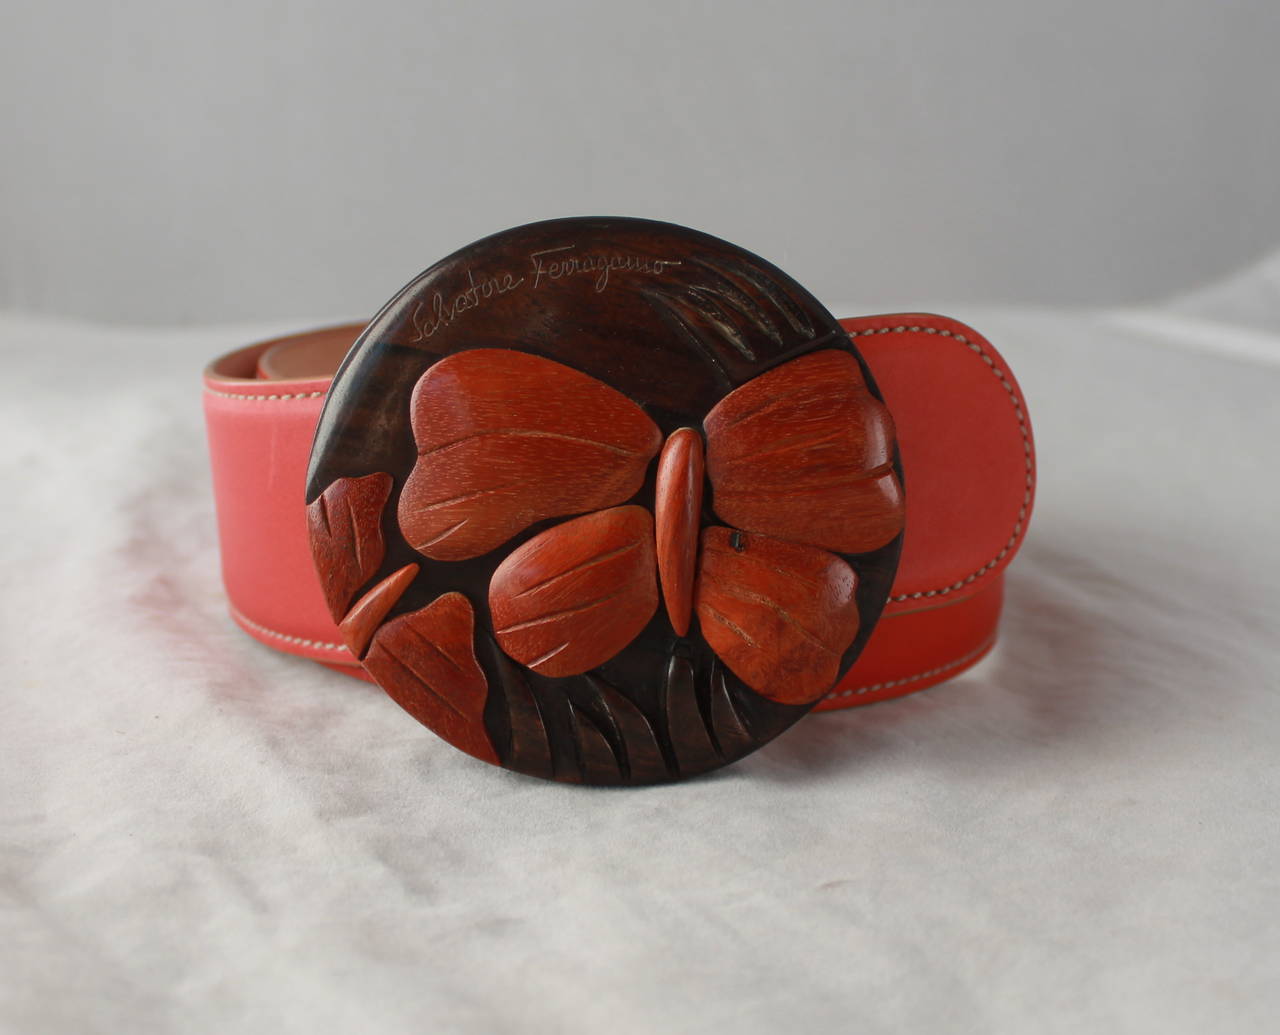 Salvatore Ferragamo Coral Belt with Butterfly Carved Wood Buckle - 85 cm. This belt is in very good condition with the only issue being that is has a slight mark from the buckle on the leather seen on image 6. This belt is in otherwise excellent